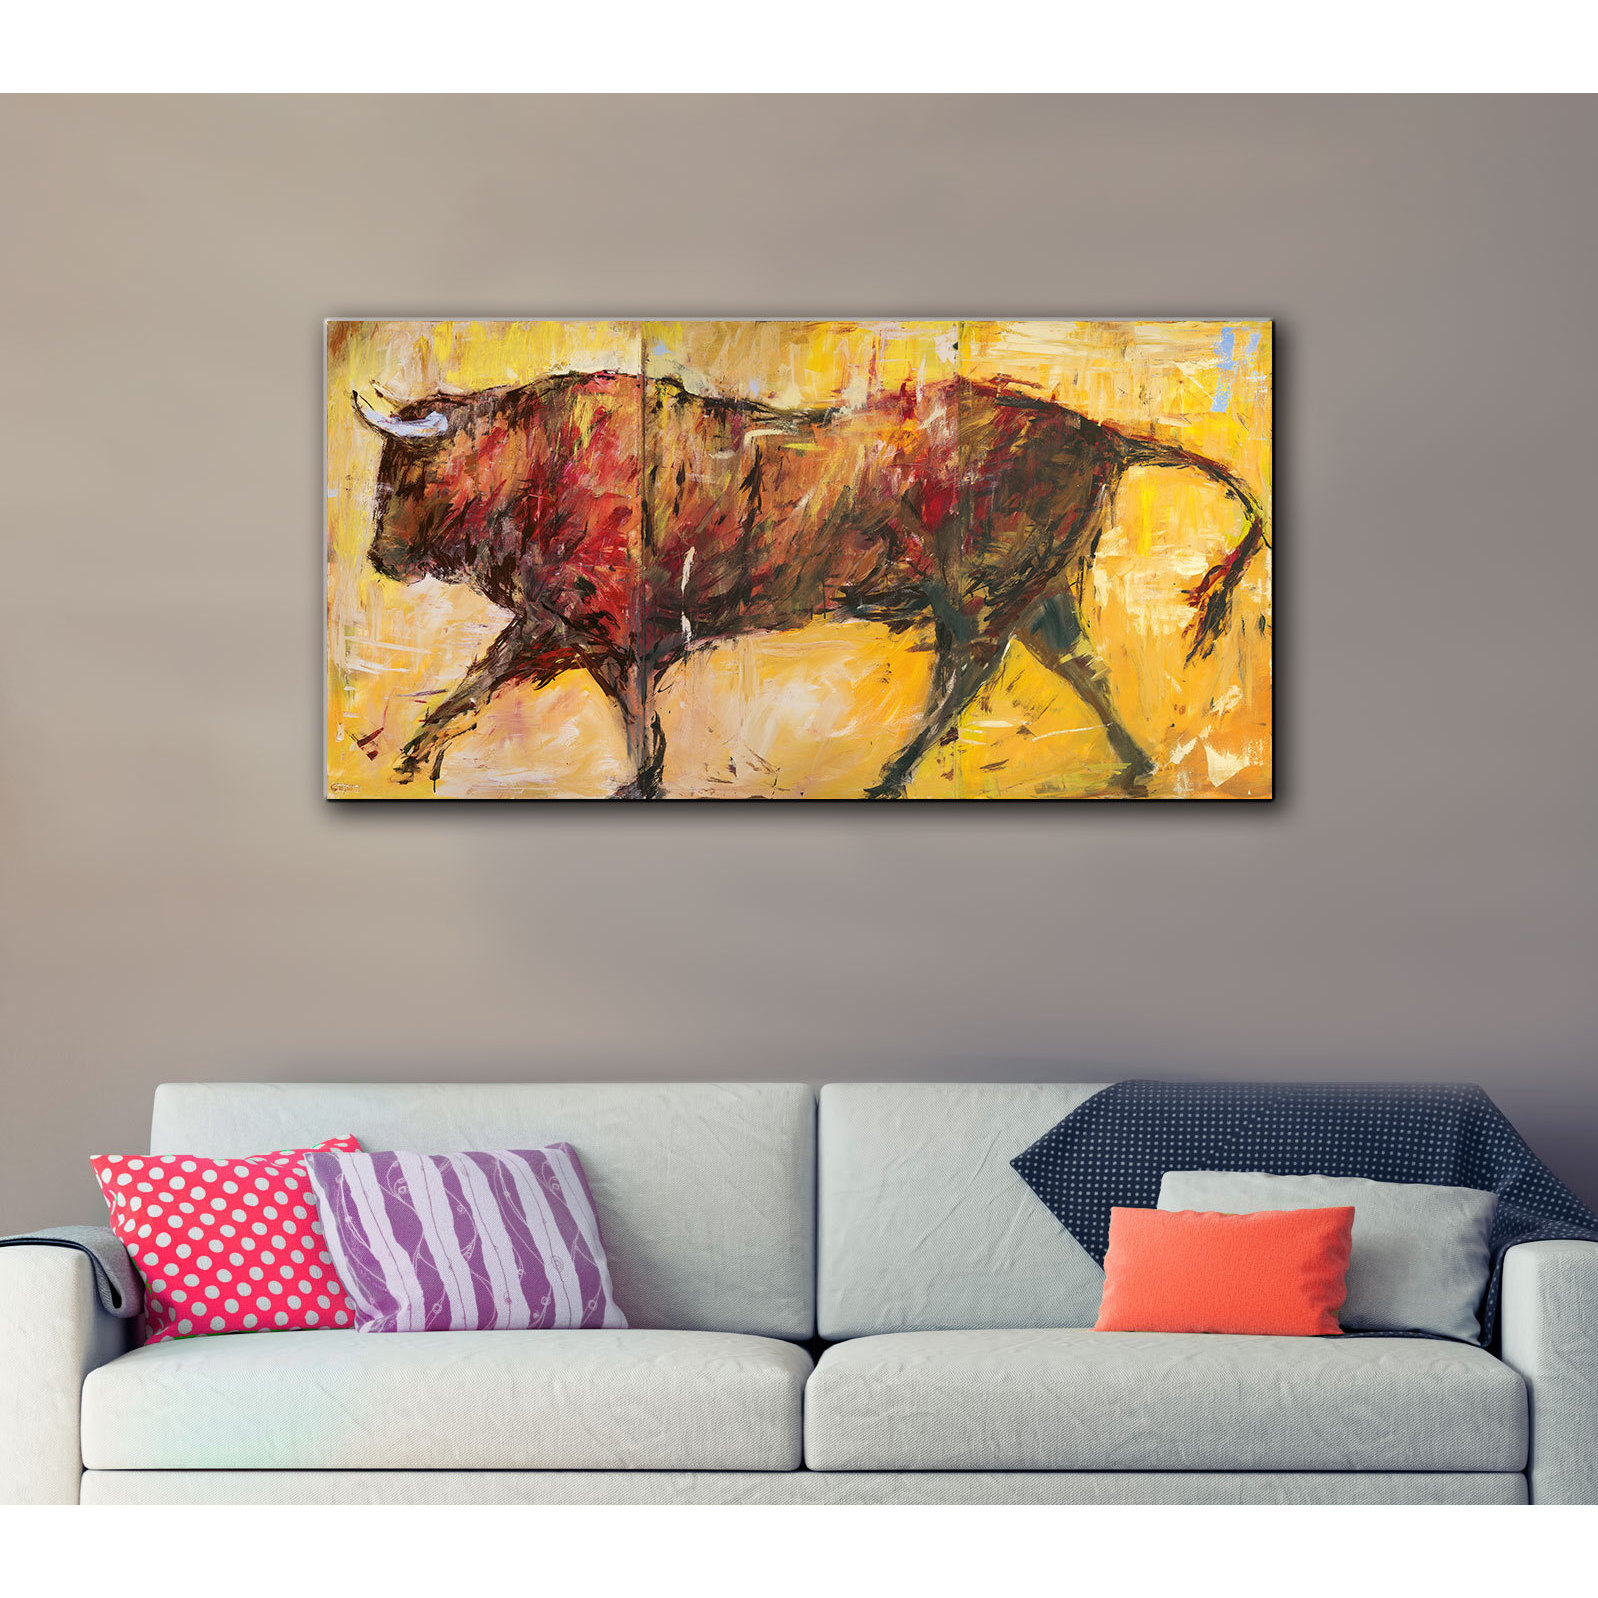 JC Pino's The Bull, 3 Piece Gallery Wrapped Canvas Set